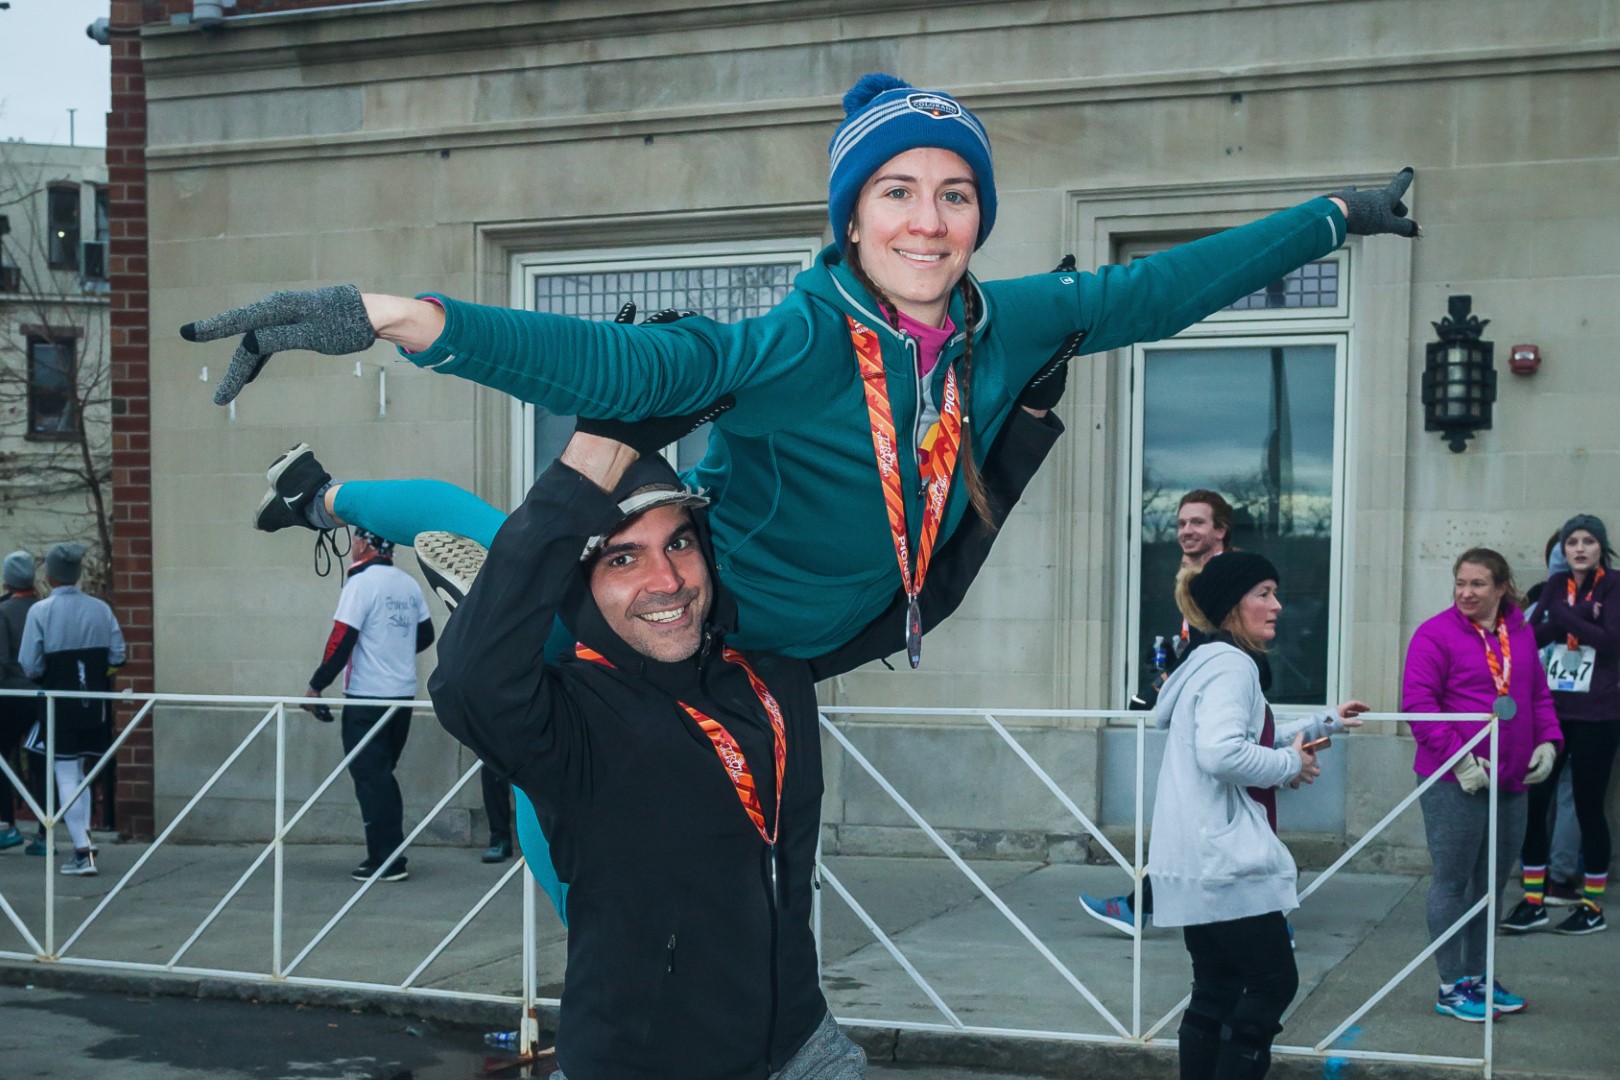 Participants Acrobatically Pose During Troy Turkey Trot